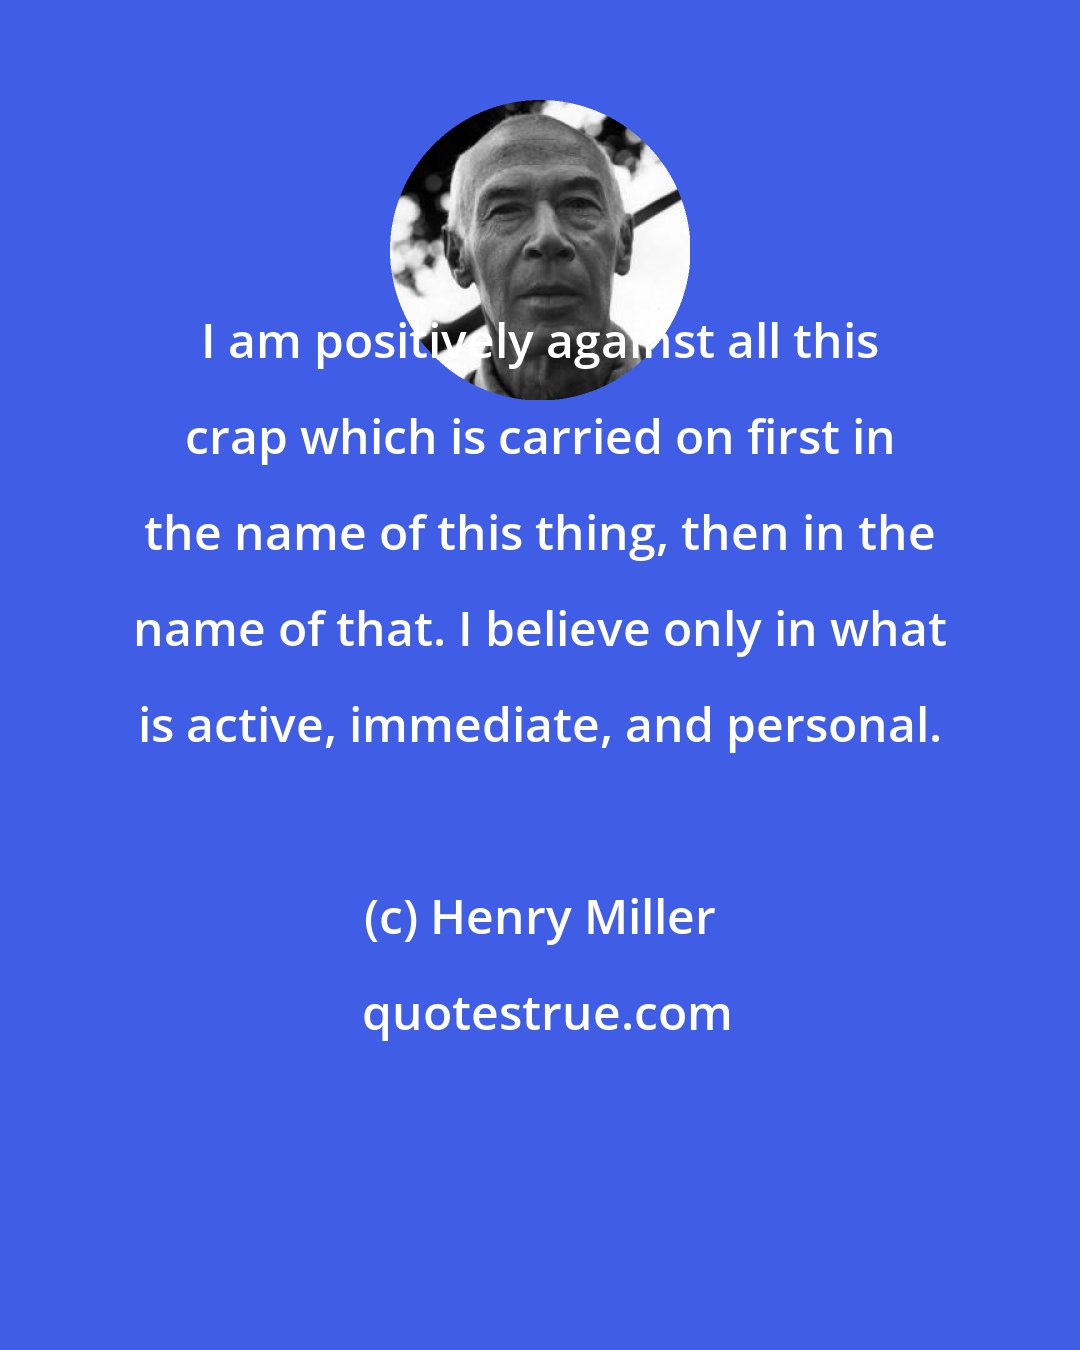 Henry Miller: I am positively against all this crap which is carried on first in the name of this thing, then in the name of that. I believe only in what is active, immediate, and personal.